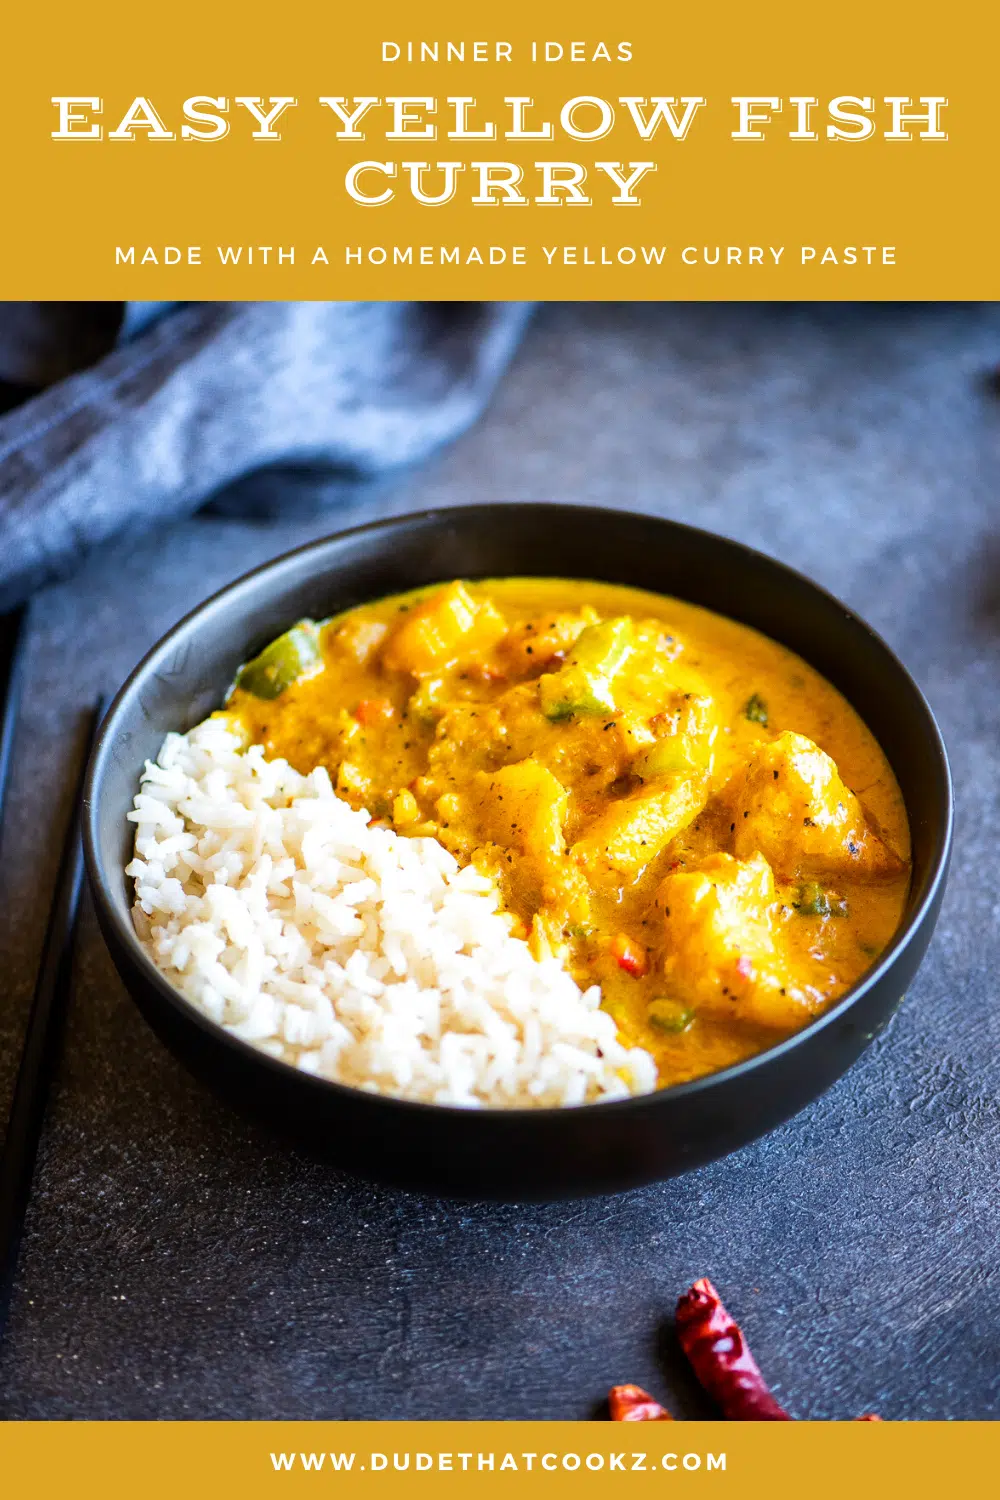 Easy yellow fish curry